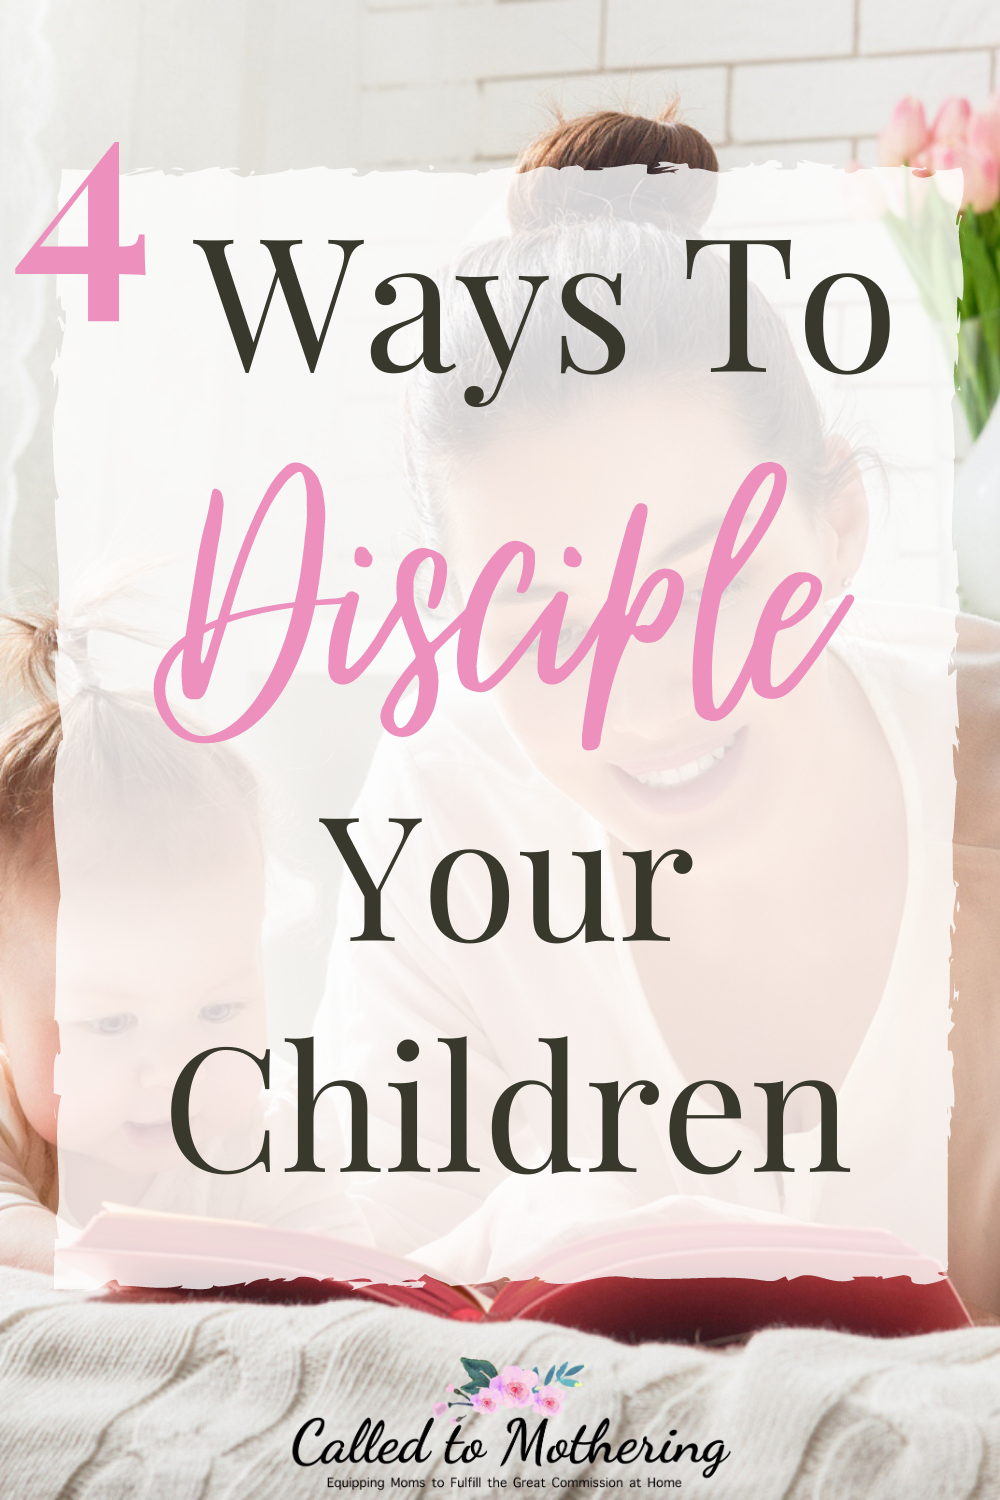 Four practical ways you can intentionally disciple your children, and encourage them in their Christian walk. #raisinggodlykids #kidsfaith #christianparenting #discipleship